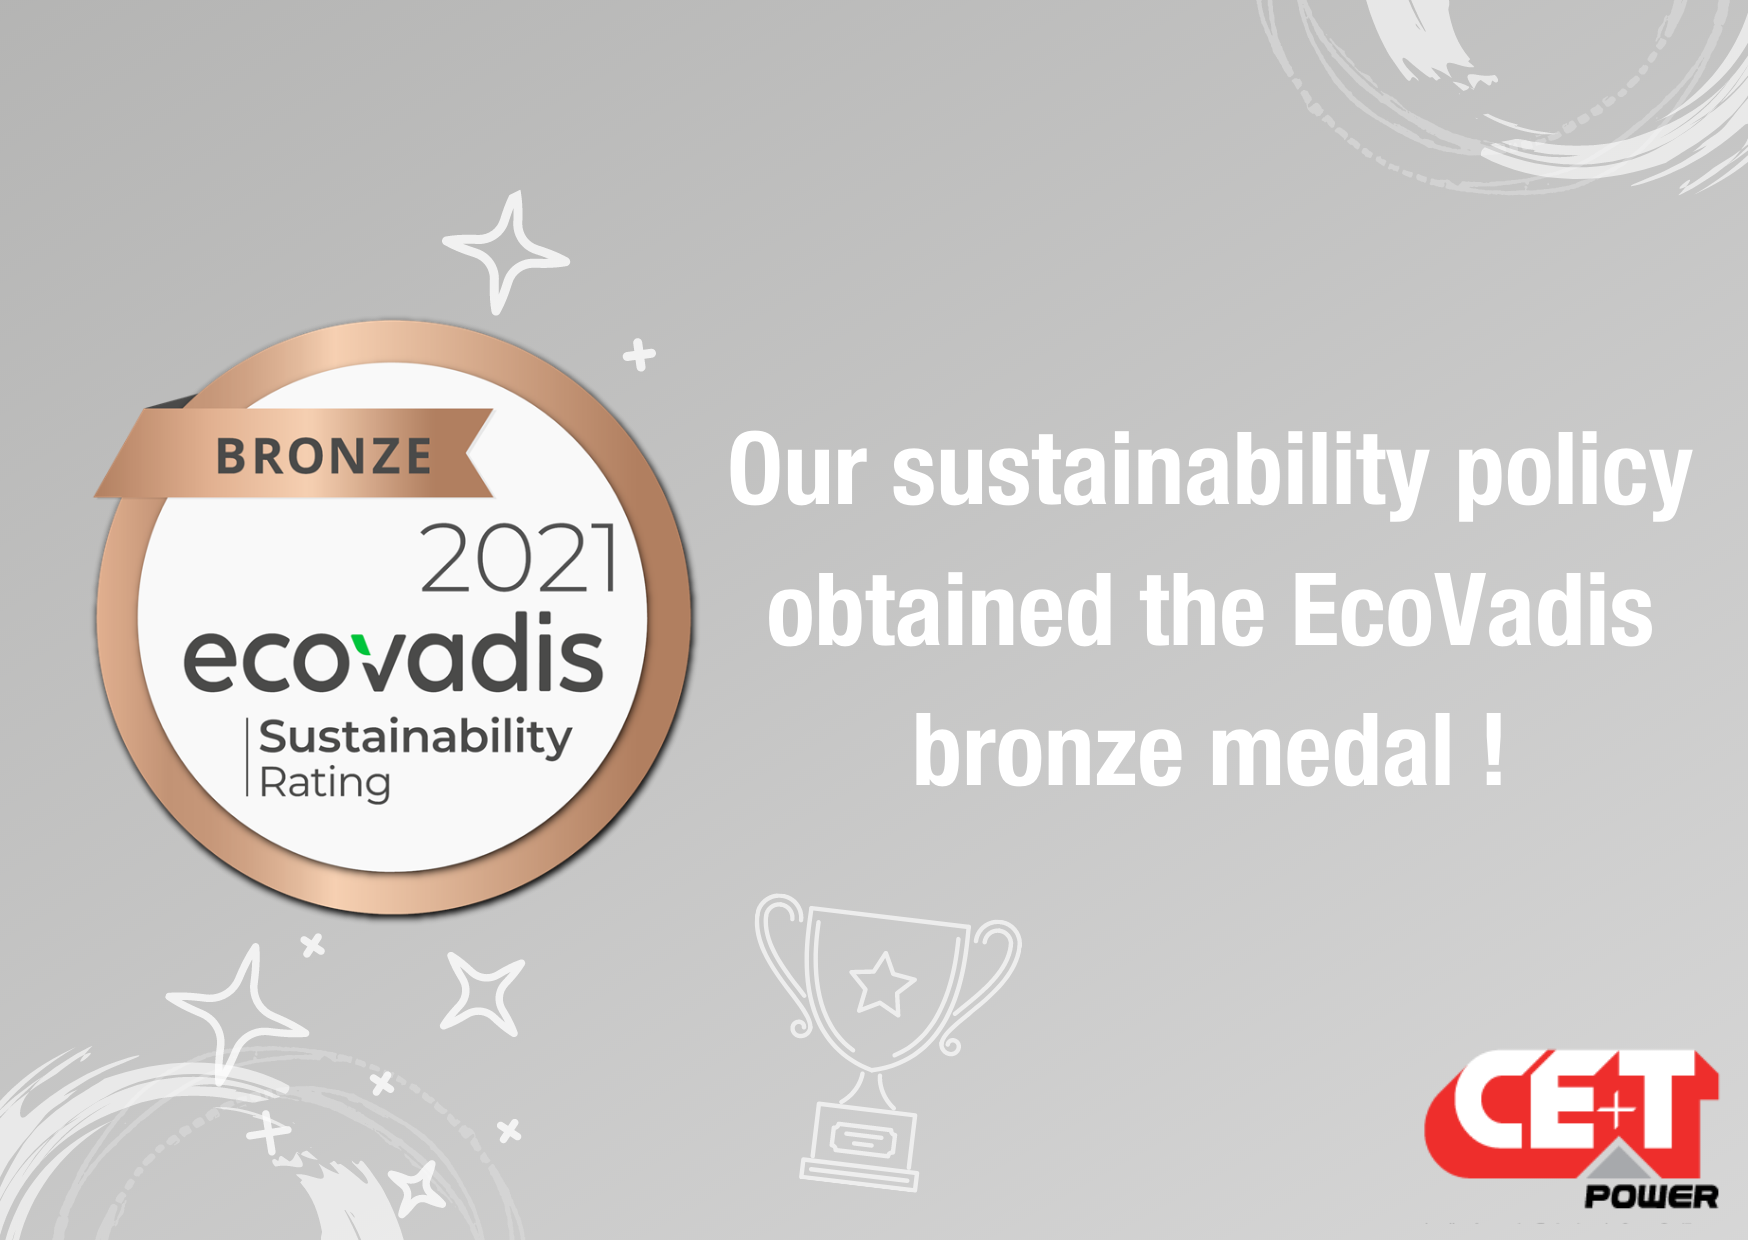 CE+T Power has been awarded a bronze medal by EcoVadis.